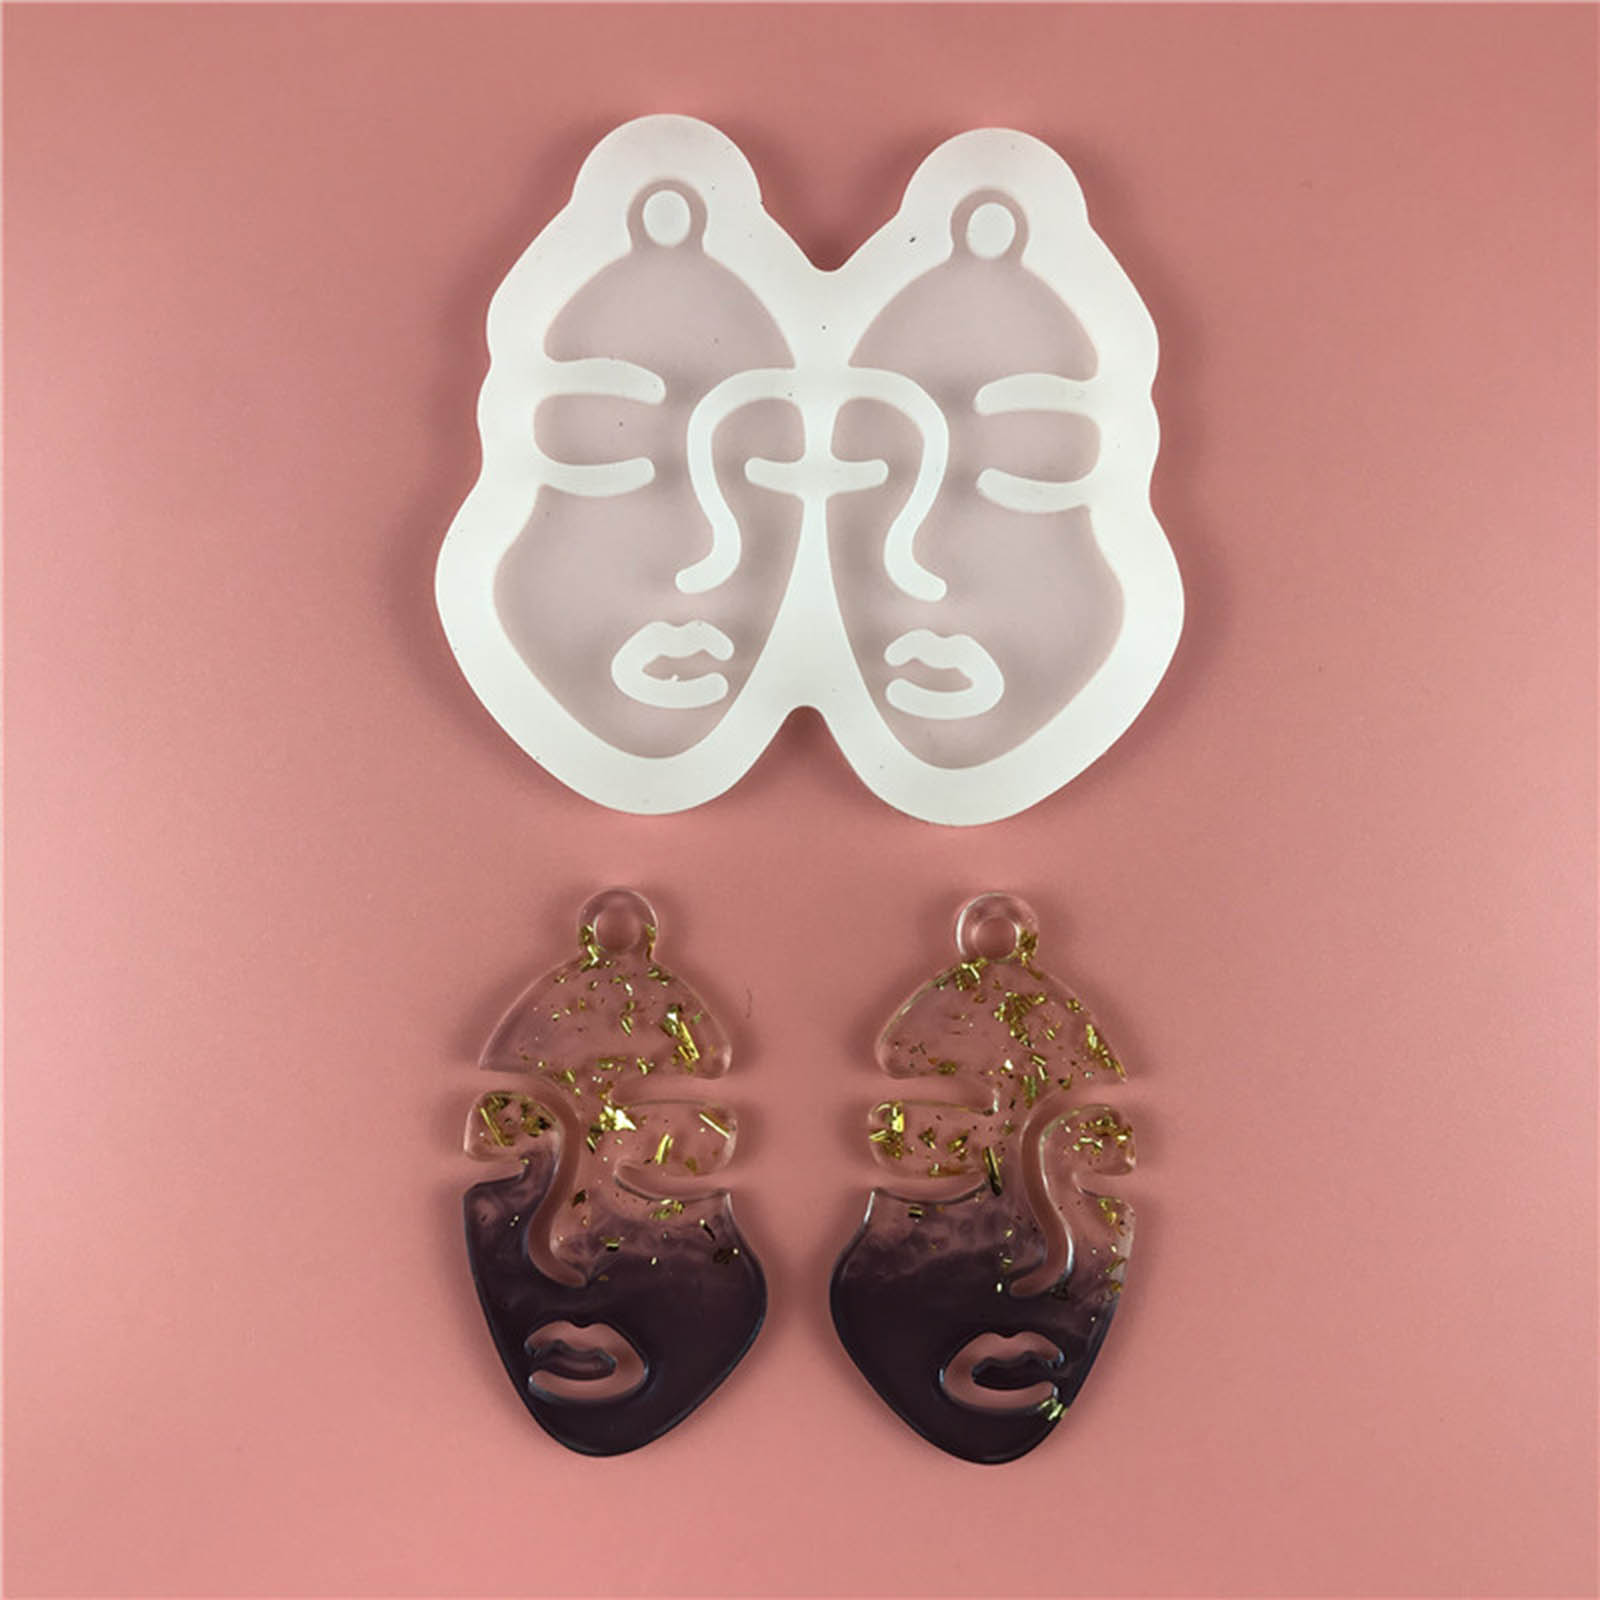 Picture of Silicone Resin Mold For Jewelry Making Earring Pendant Face White 8.5cm x 8cm, 1 Piece